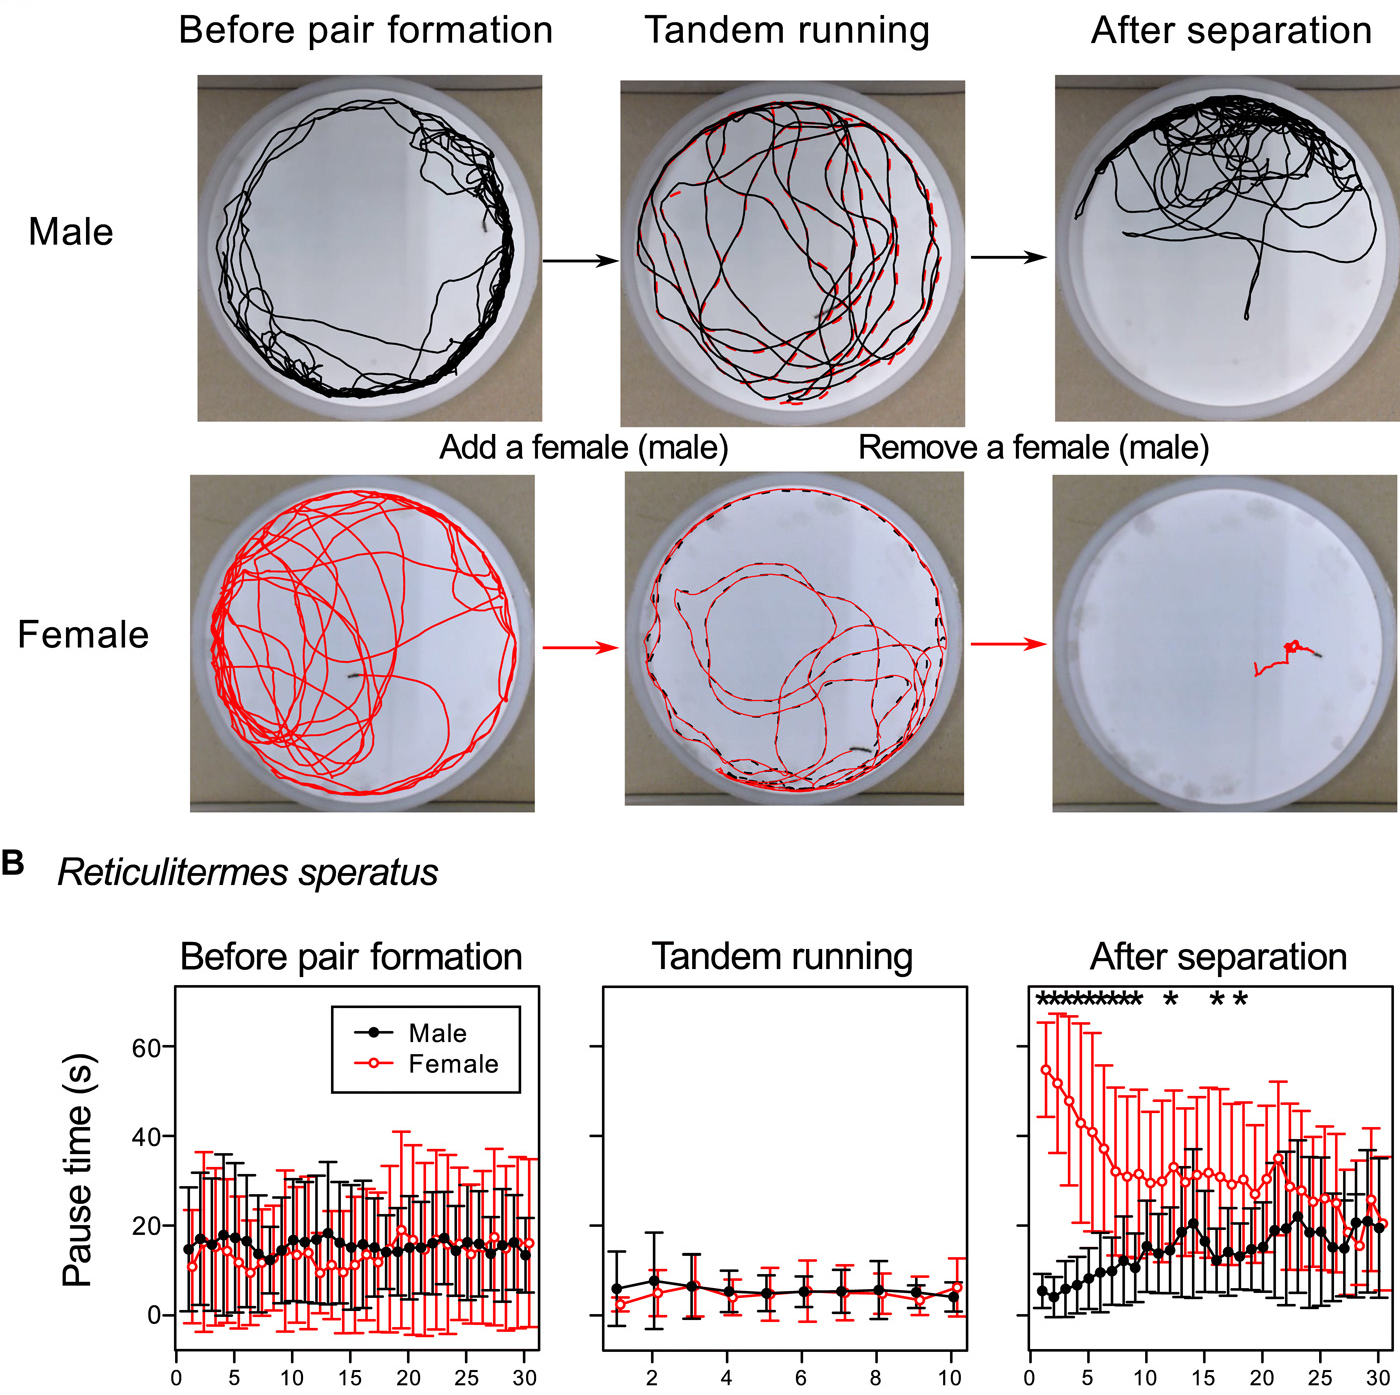 Adaptive switch to sexually dimorphic movements by partner-seeking termites